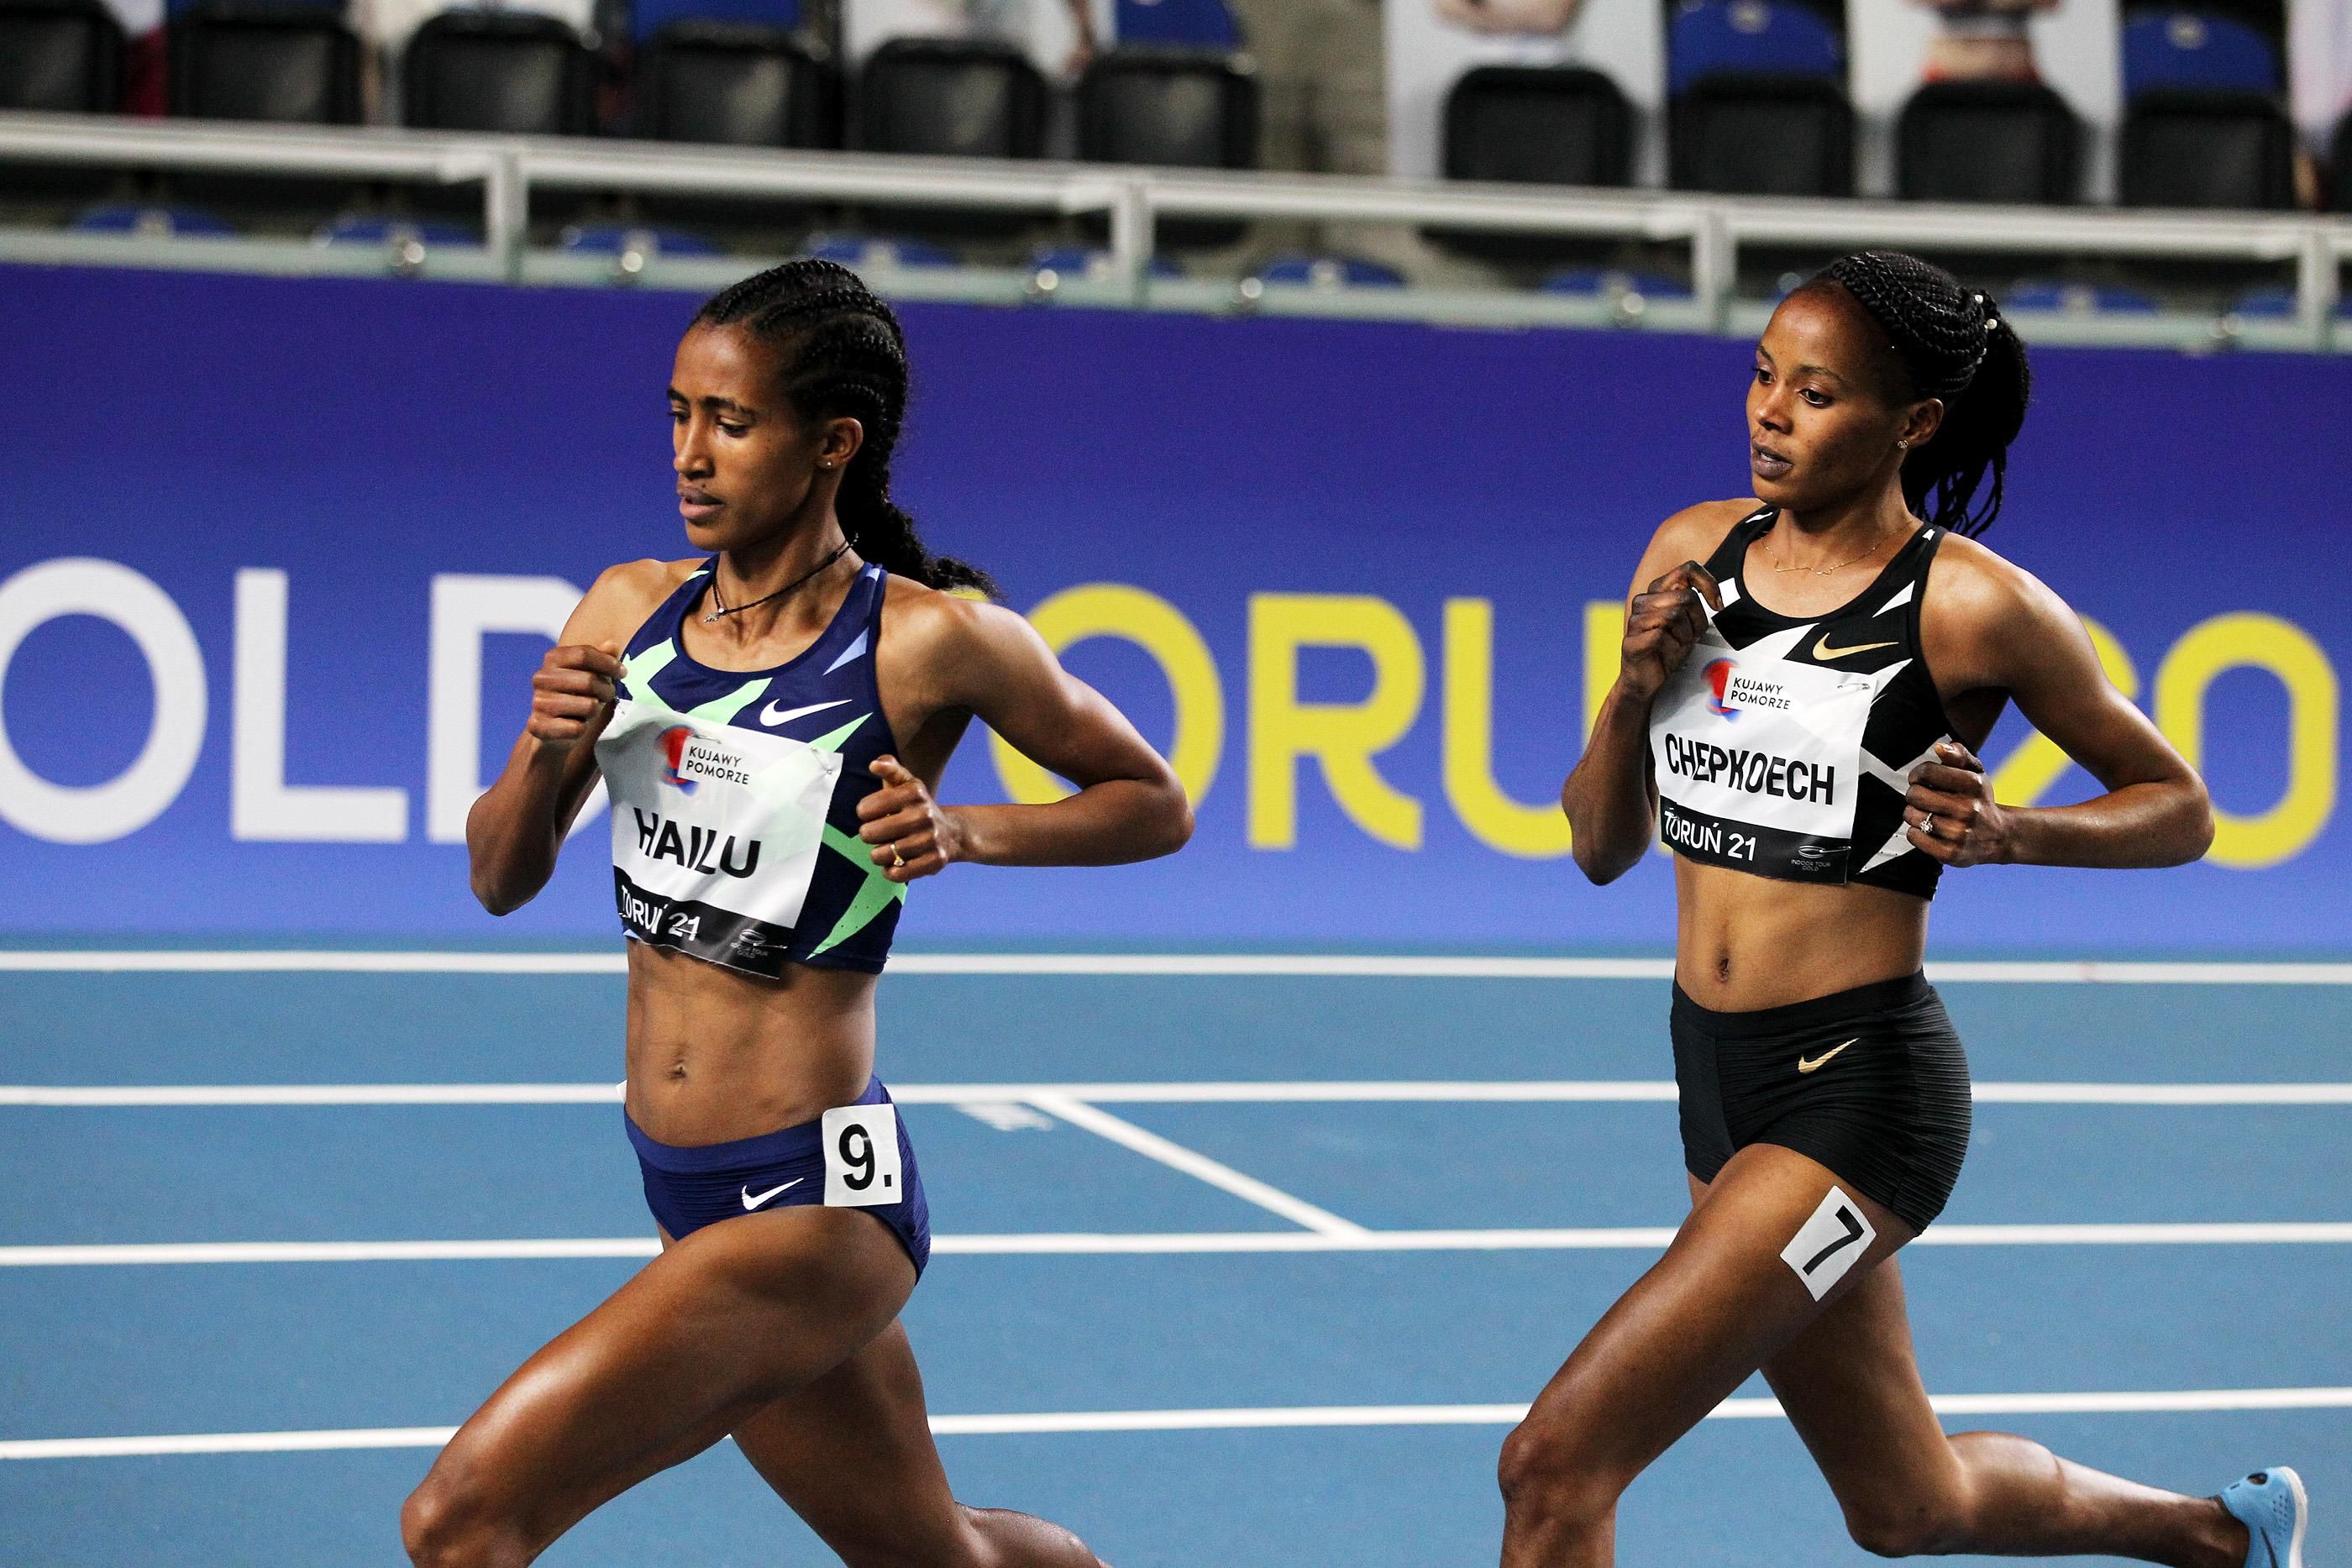 Lemlem Hailu on her way to winning the 3000m at the World Athletics Indoor Tour Gold meeting in Torun